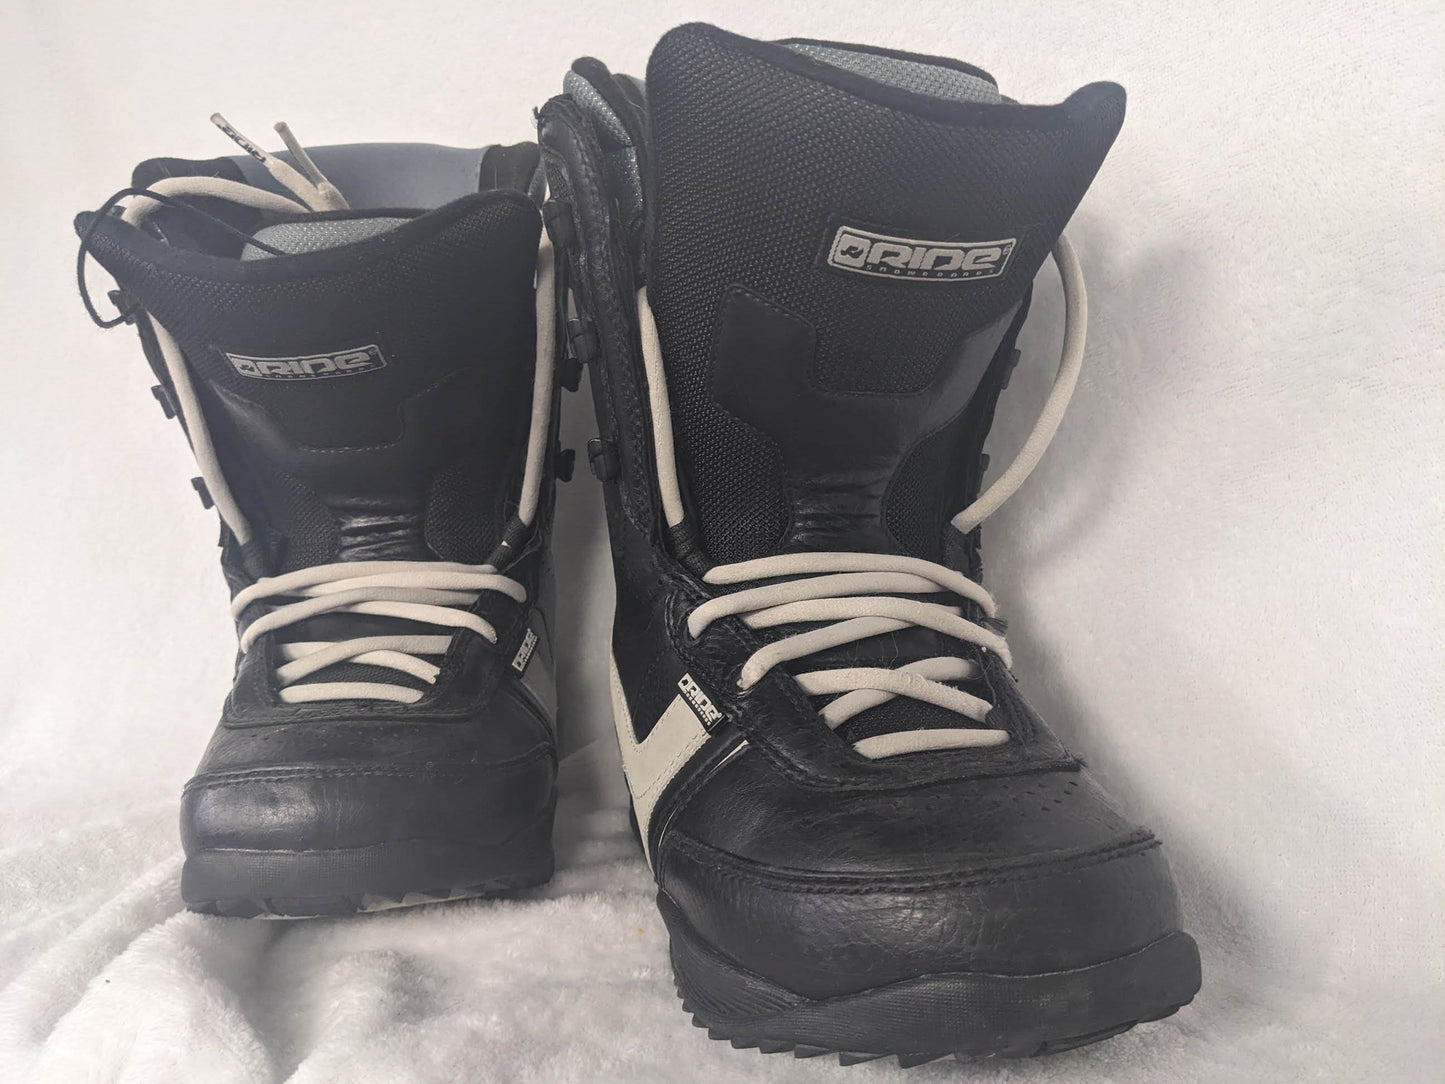 Ride Orion Women's Snowboard Boots Size 6 Color Black Condition Used